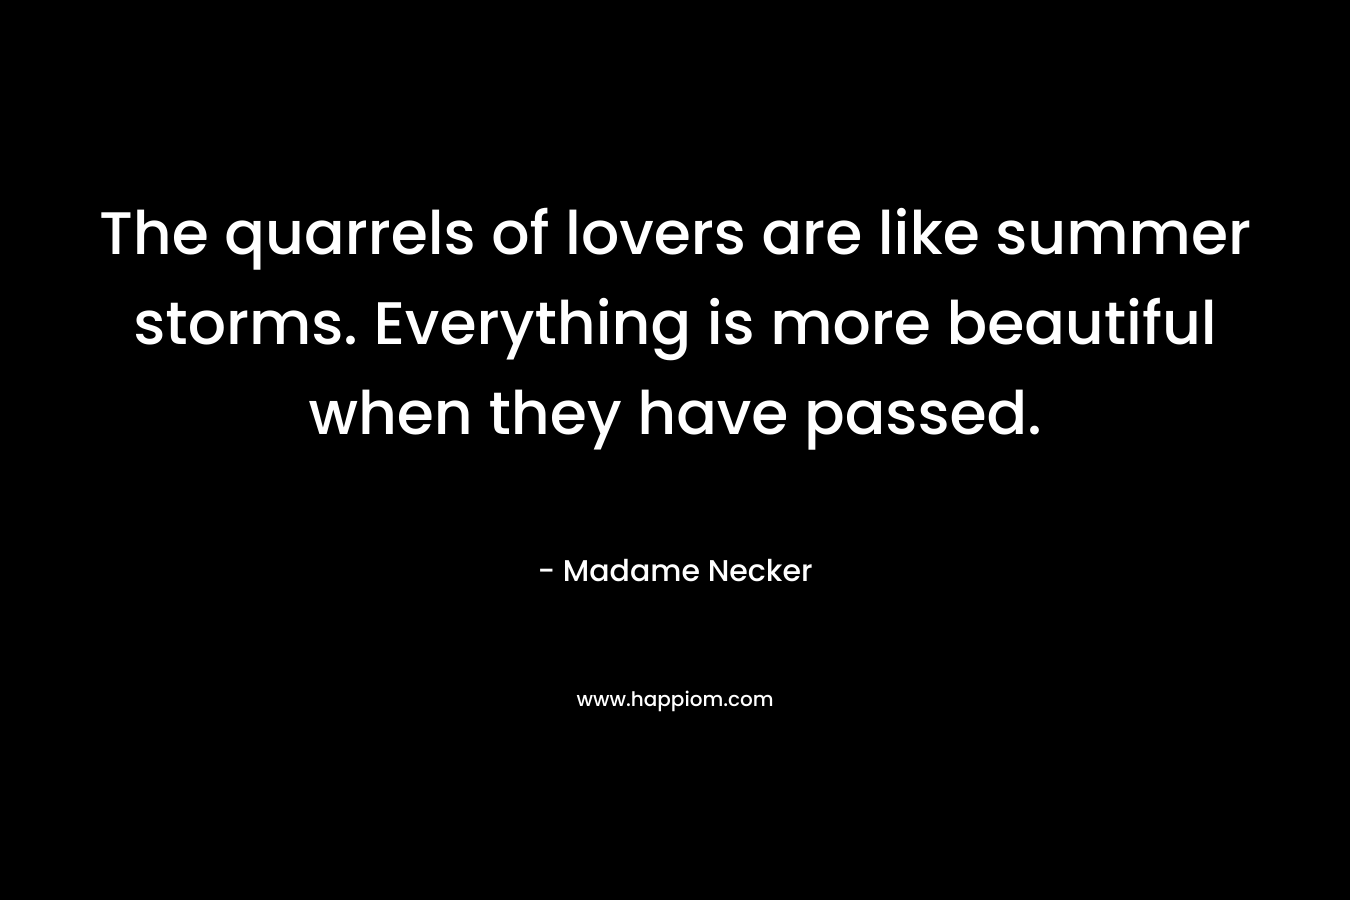 The quarrels of lovers are like summer storms. Everything is more beautiful when they have passed. – Madame Necker